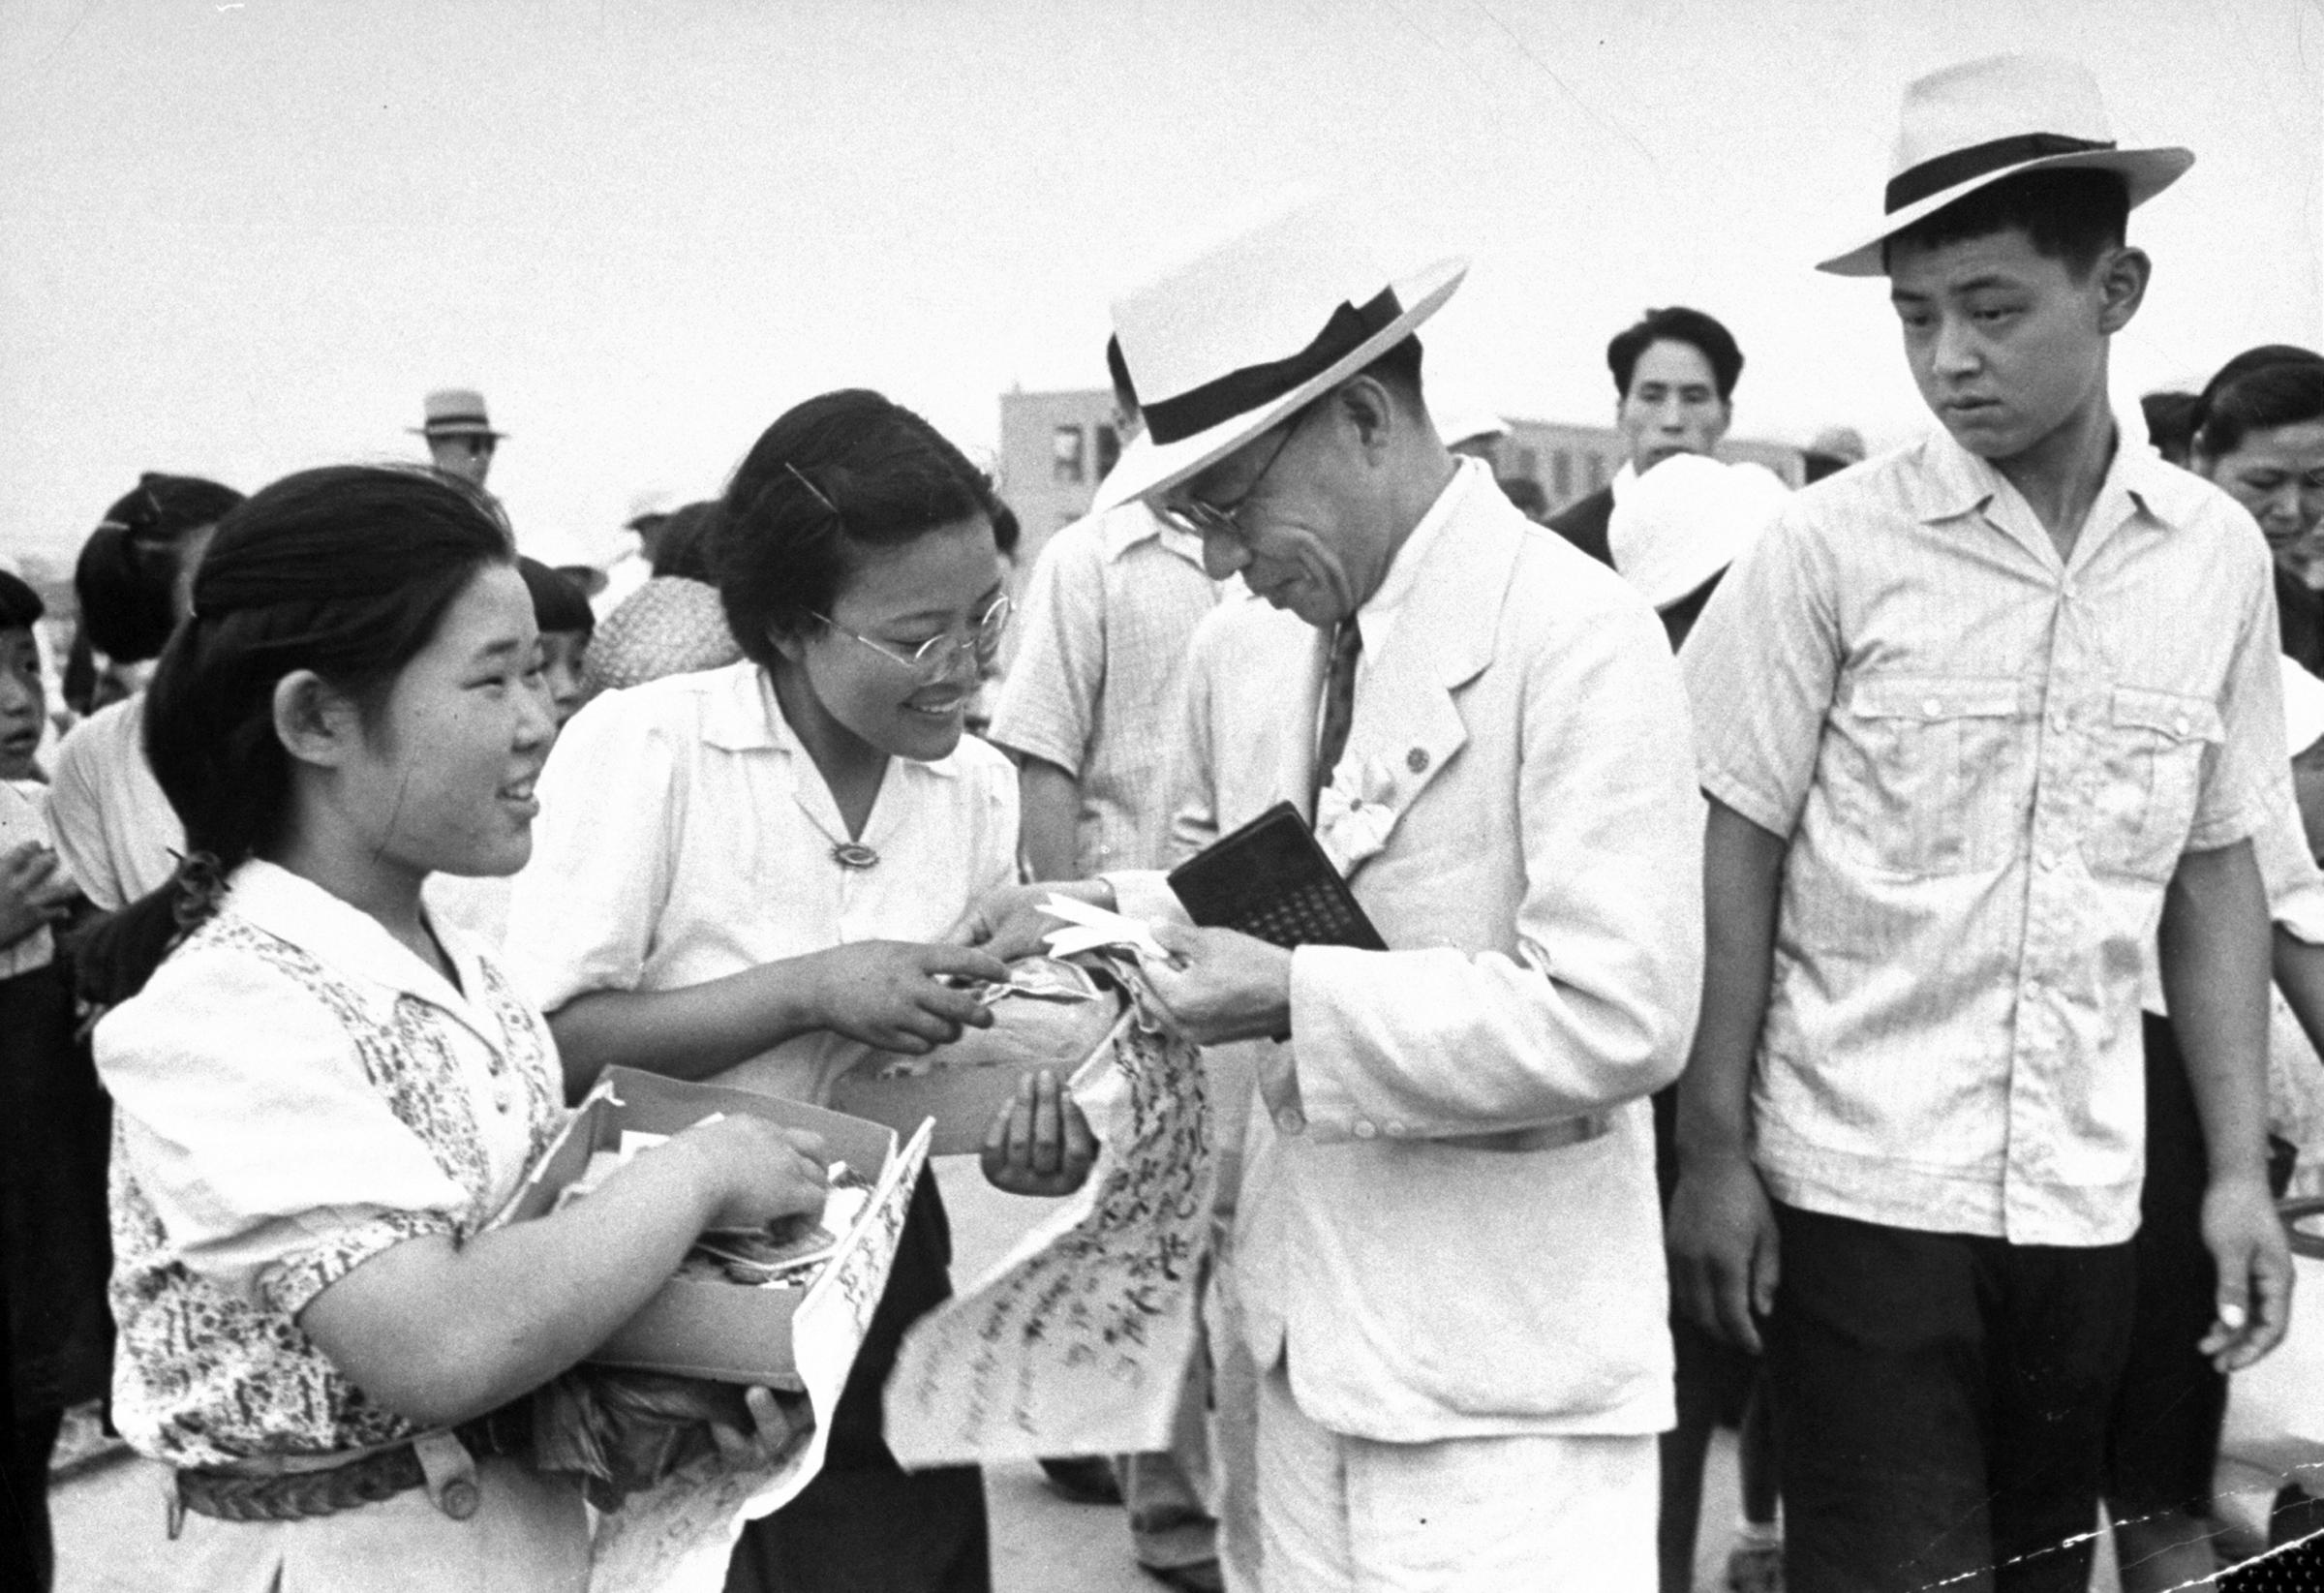 Girls selling peace ribbons during anniversary of bomb dropping in Hiroshima.